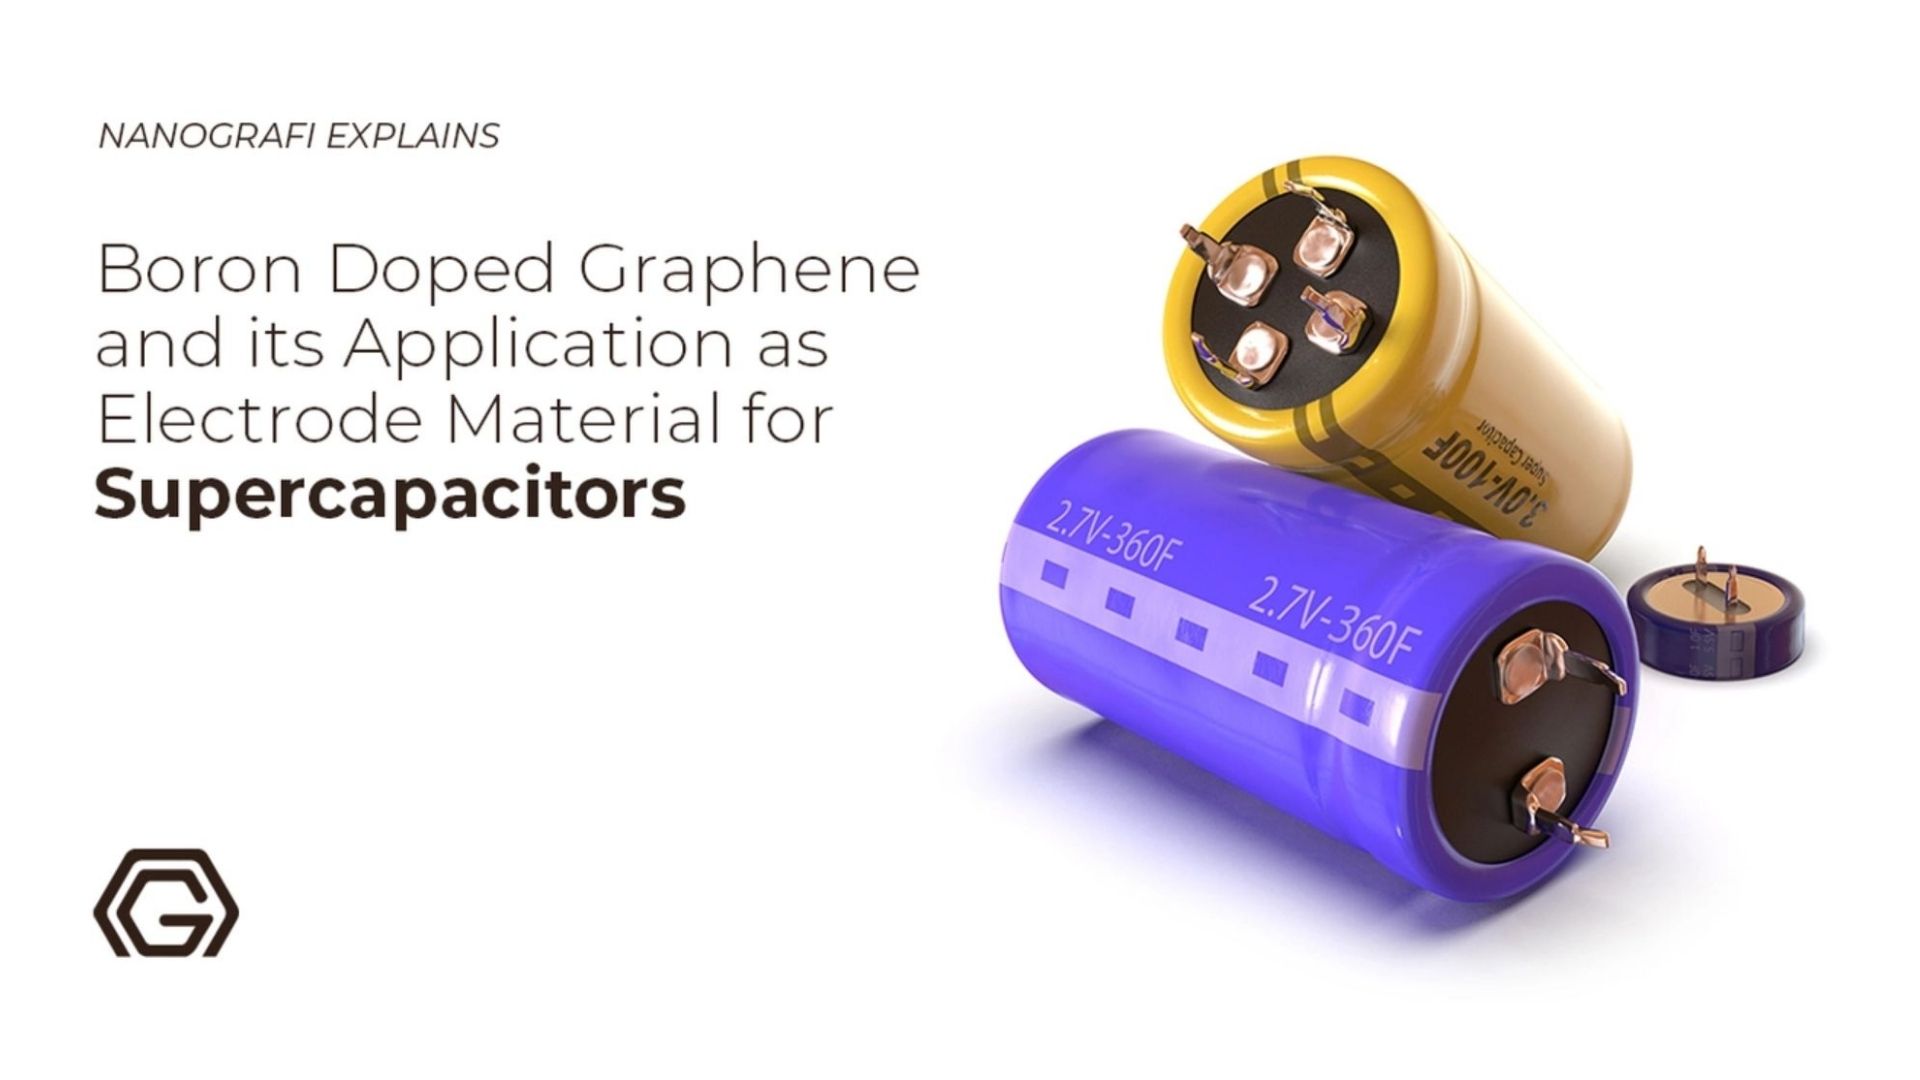 Boron doped graphene and its applications as electrode material for supercapacitors